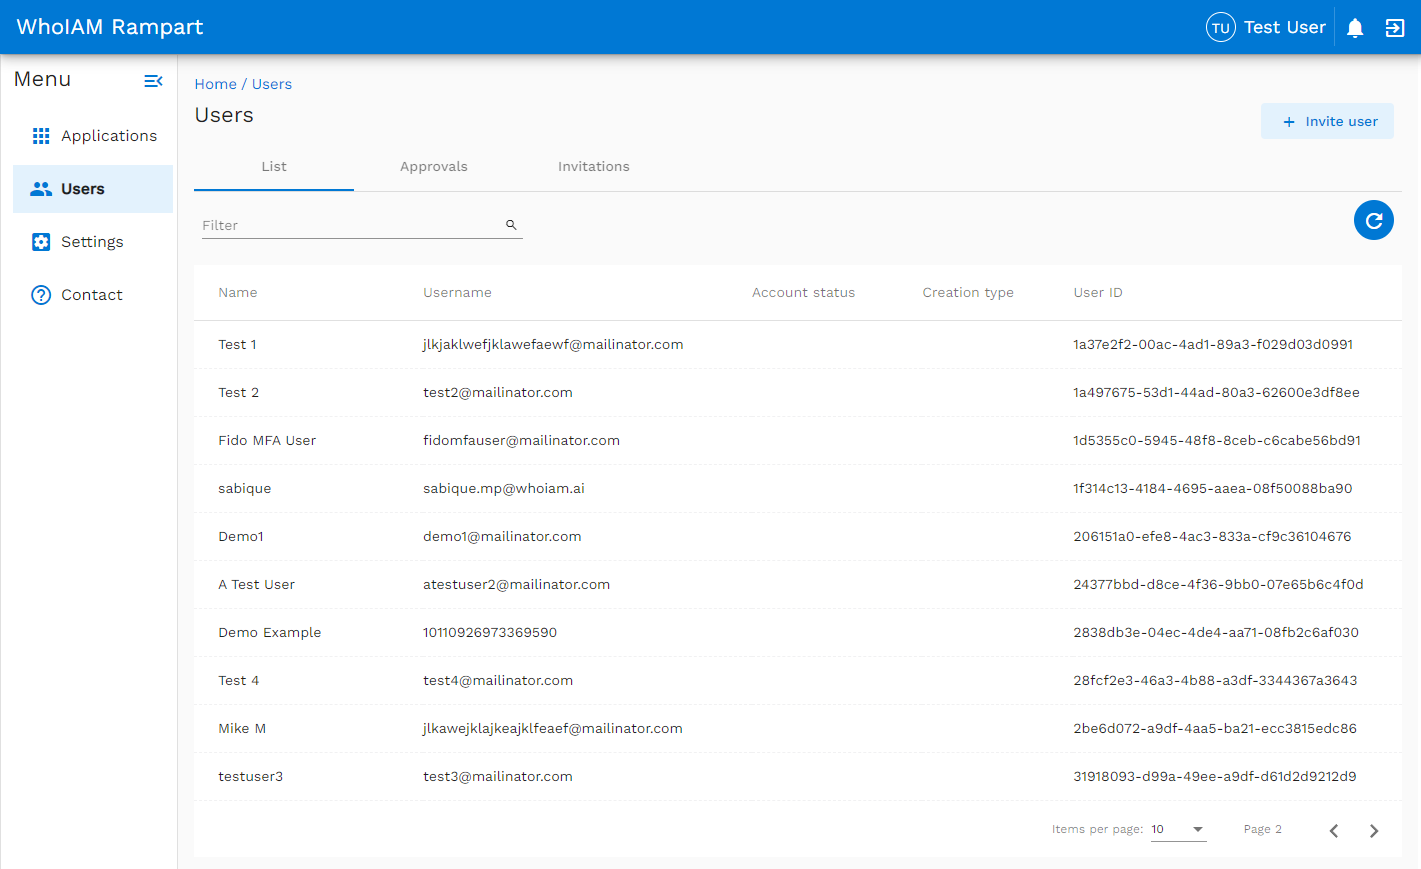 Screenshot showing the WhoIAM Rampart user list in the Azure AD B2C tenant.